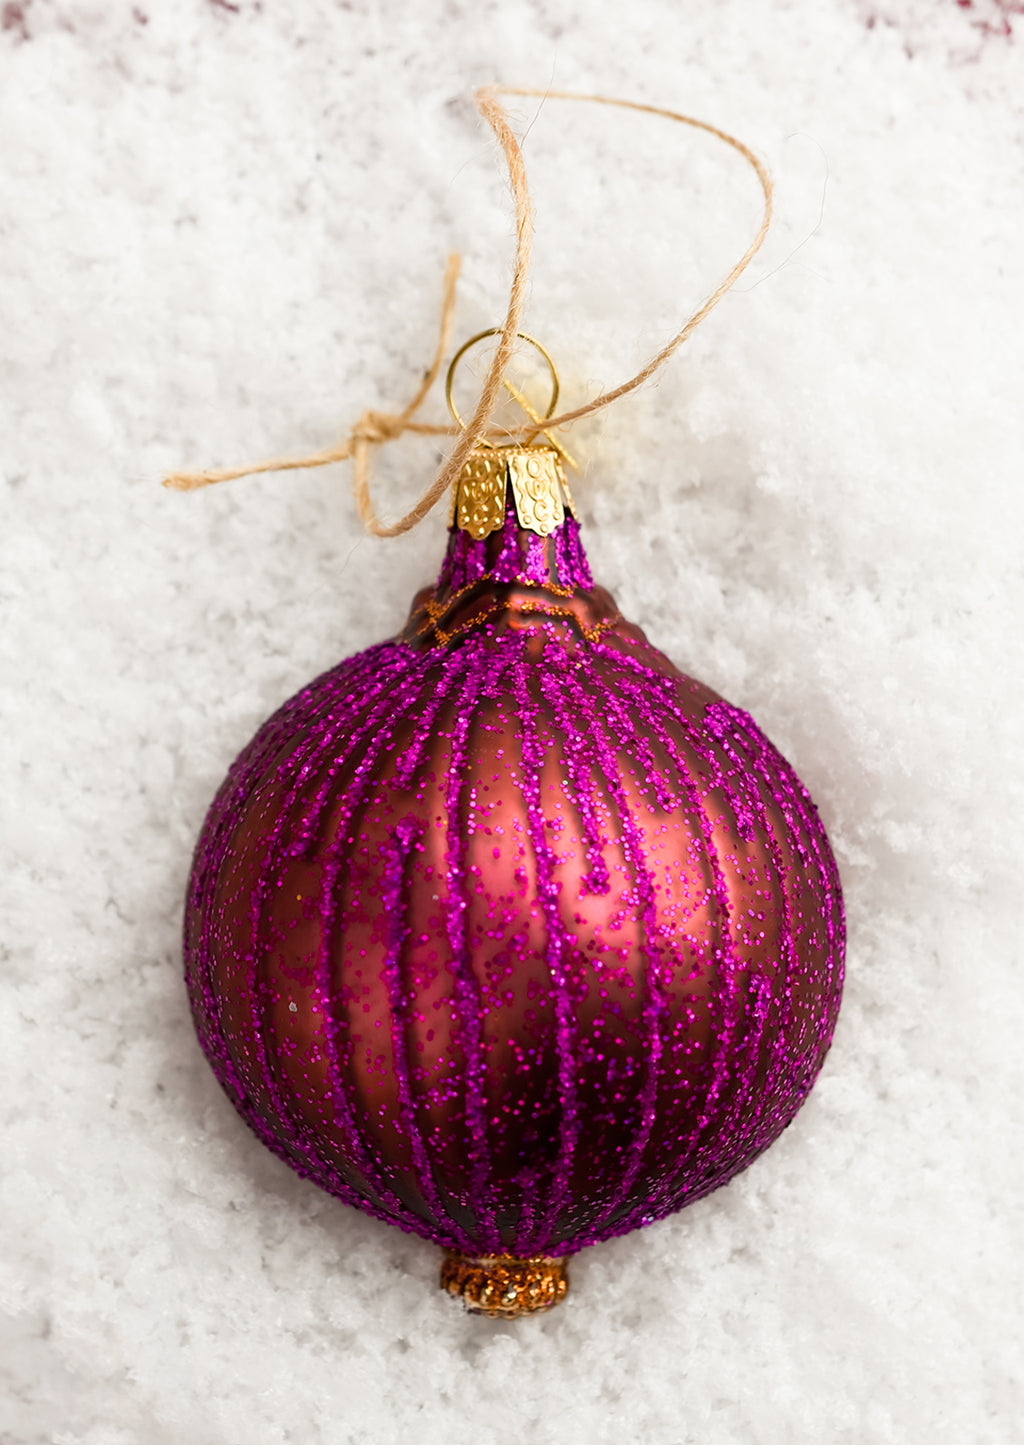 2: A glass holiday ornament of a sliced red onion.